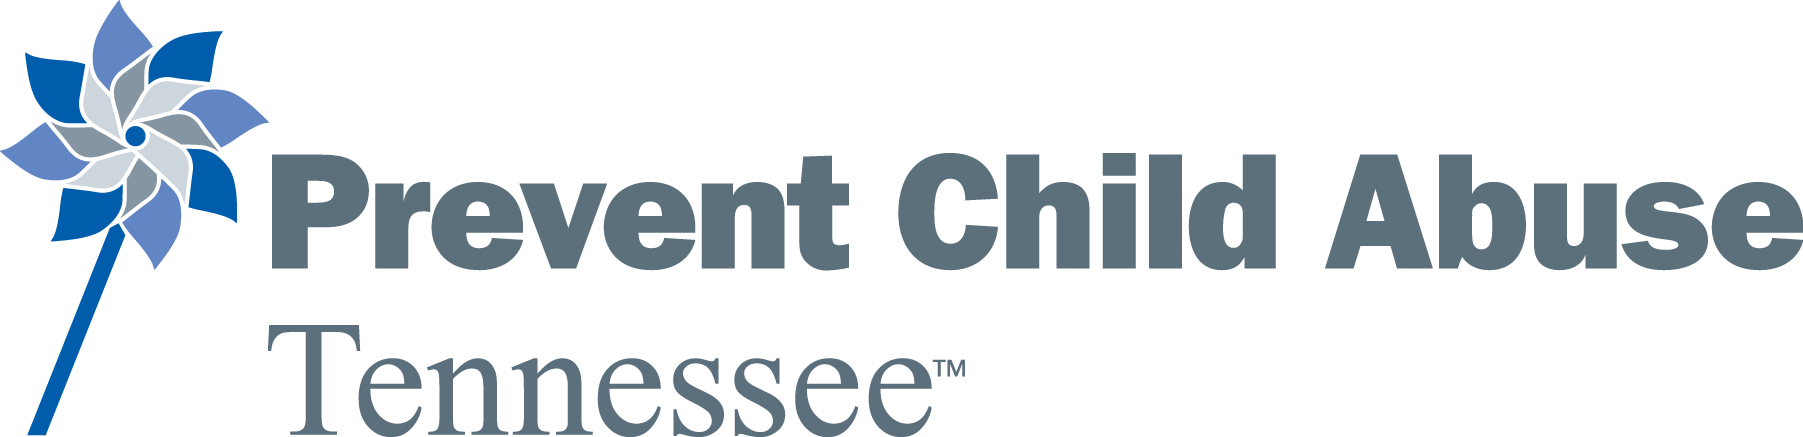 Prevent Child Abuse Tennessee Company Logo